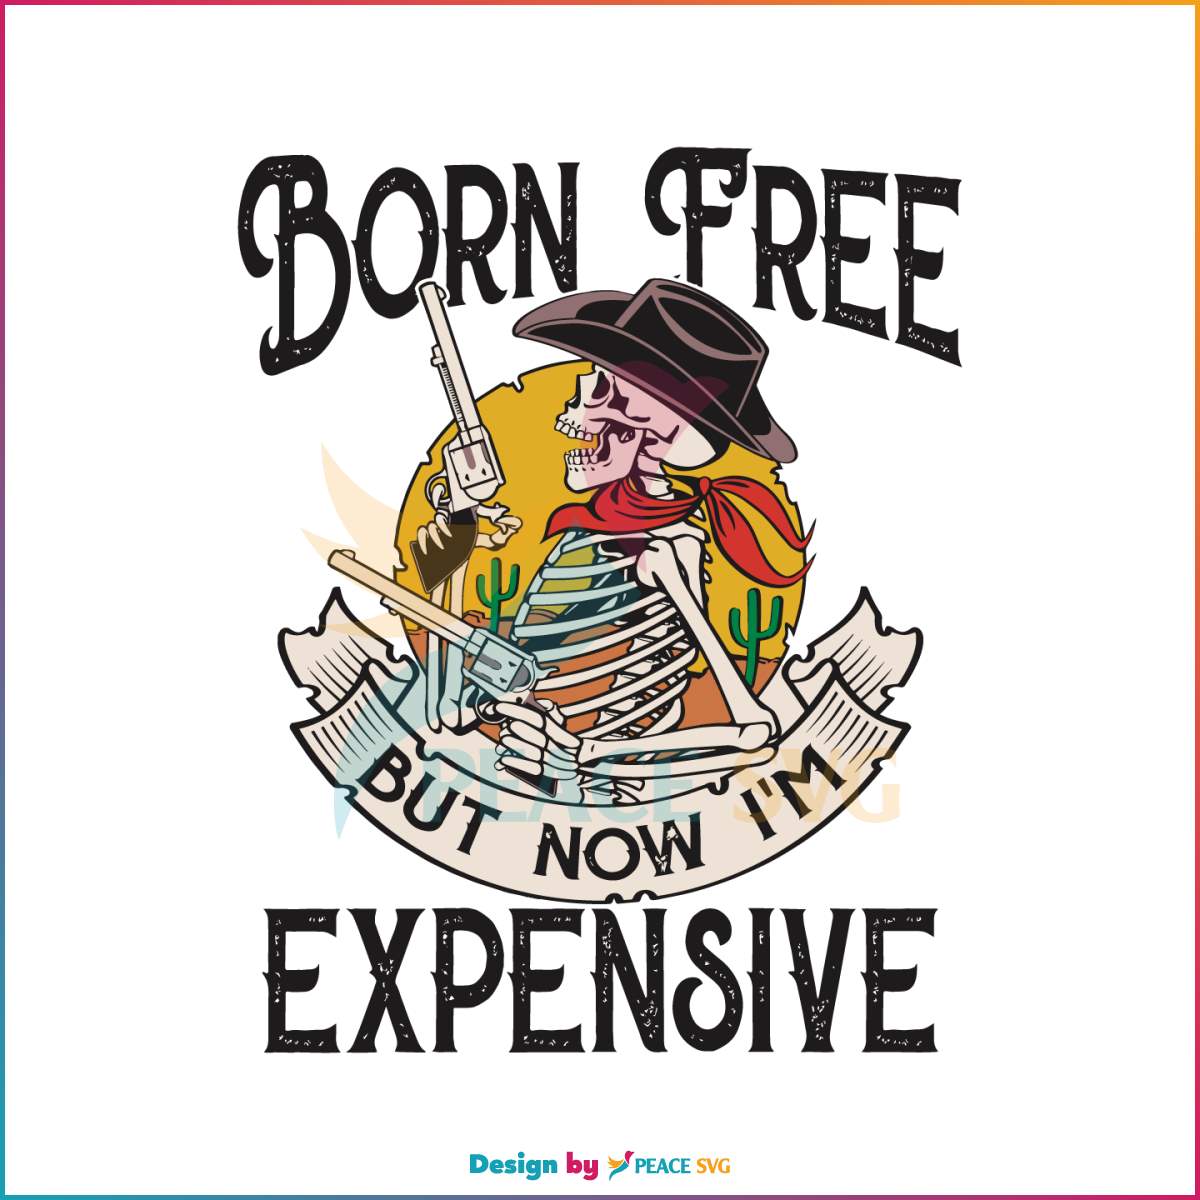 born-free-but-now-im-expensive-svg-cutting-digital-file